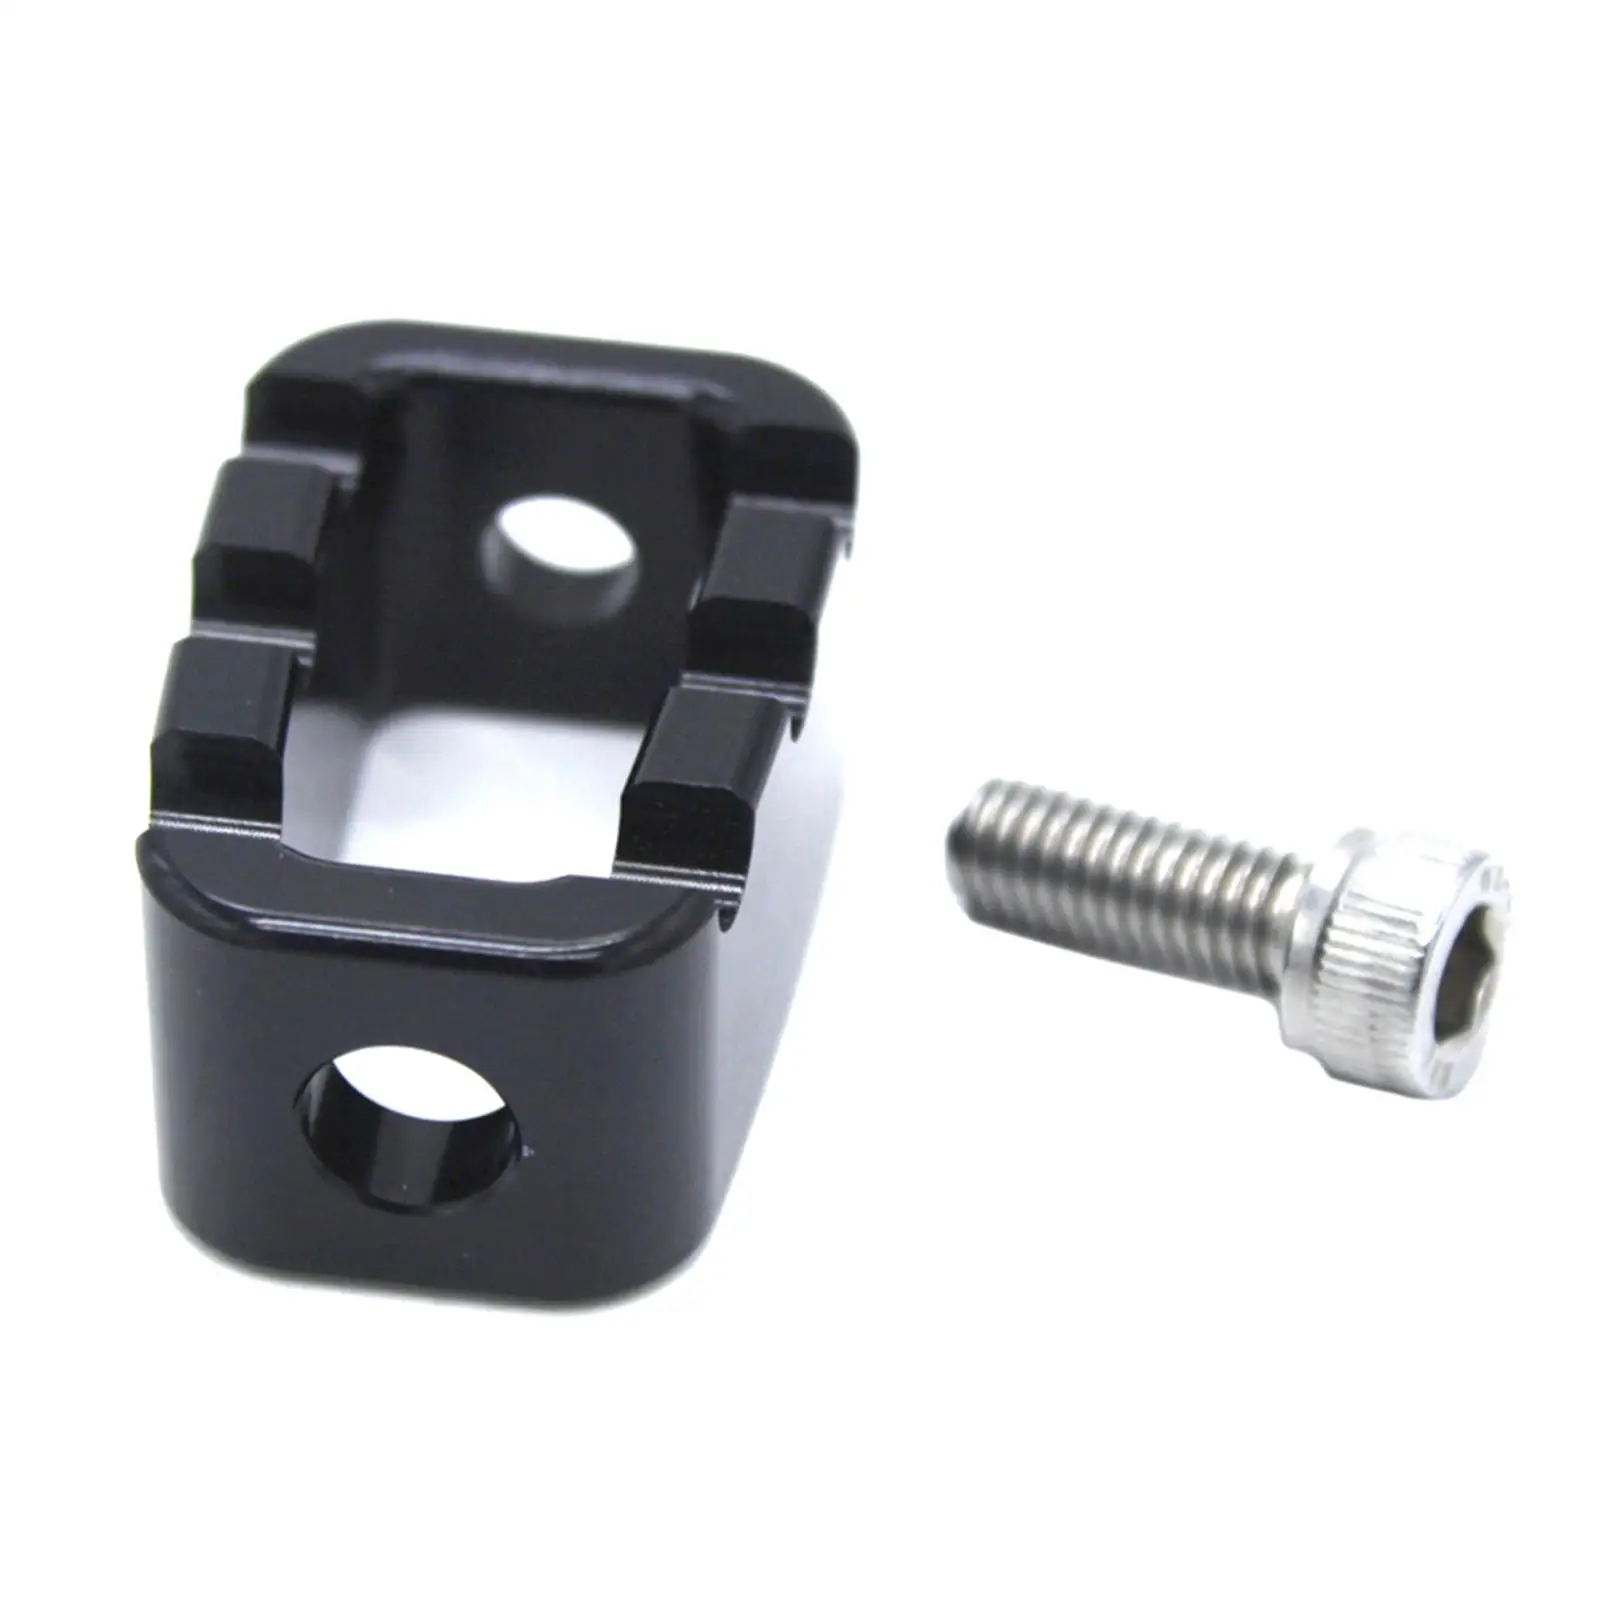 er Selector Lever Enlarged Anti Slip Gear Control Peg Pad for 